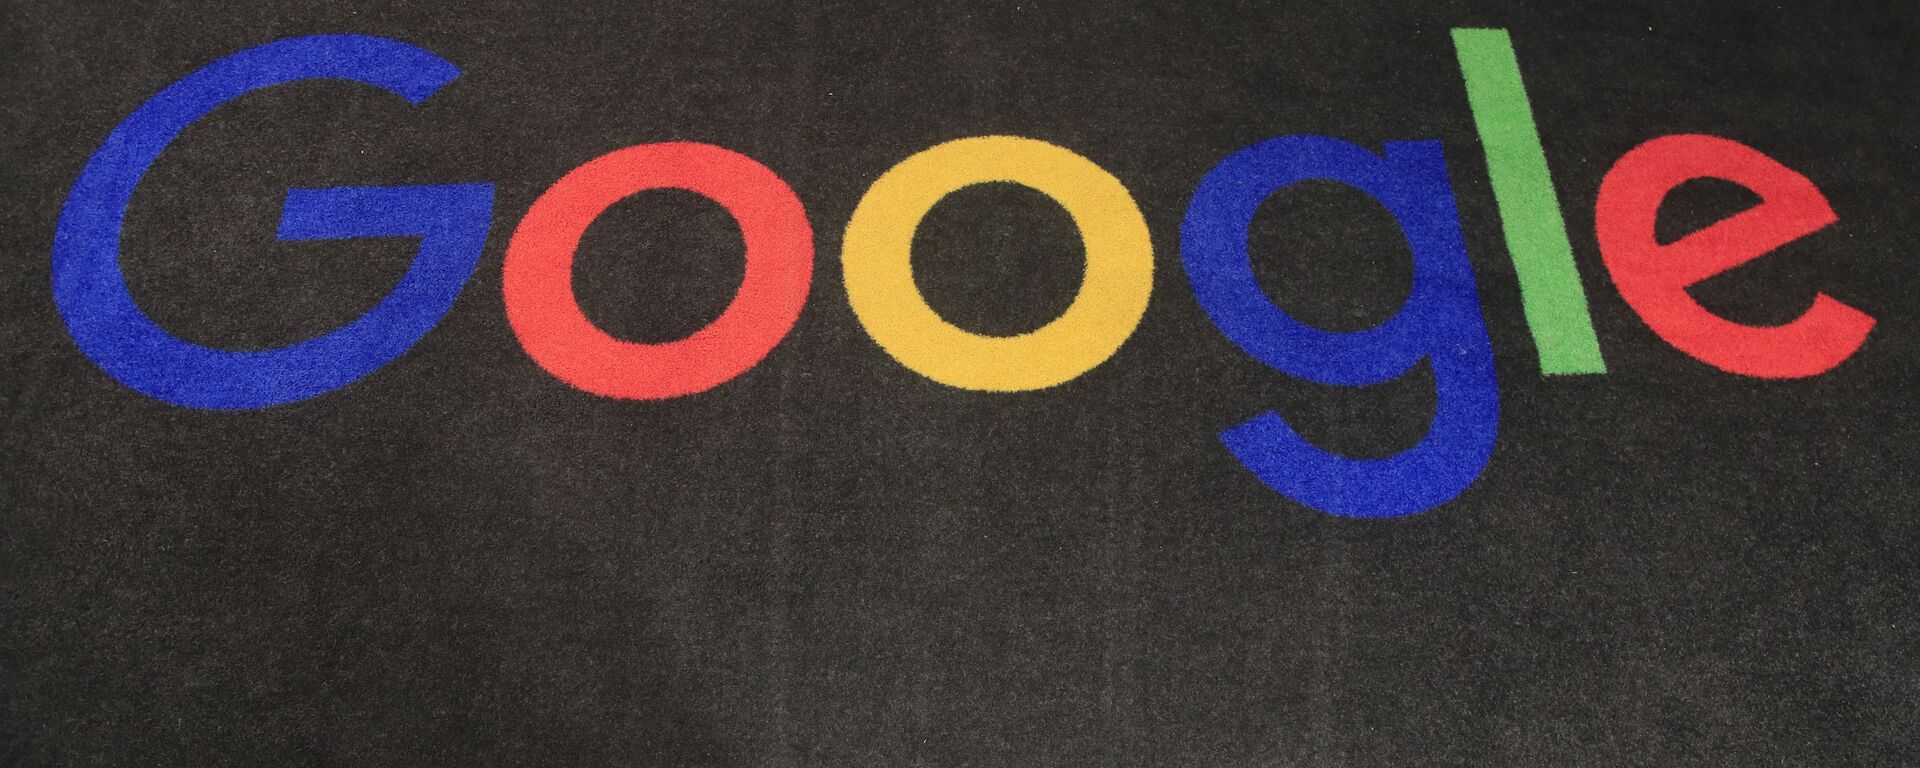 In this Nov. 18, 2019, file photo, the logo of Google is displayed on a carpet at the entrance hall of Google France in Paris. - Sputnik International, 1920, 18.10.2022